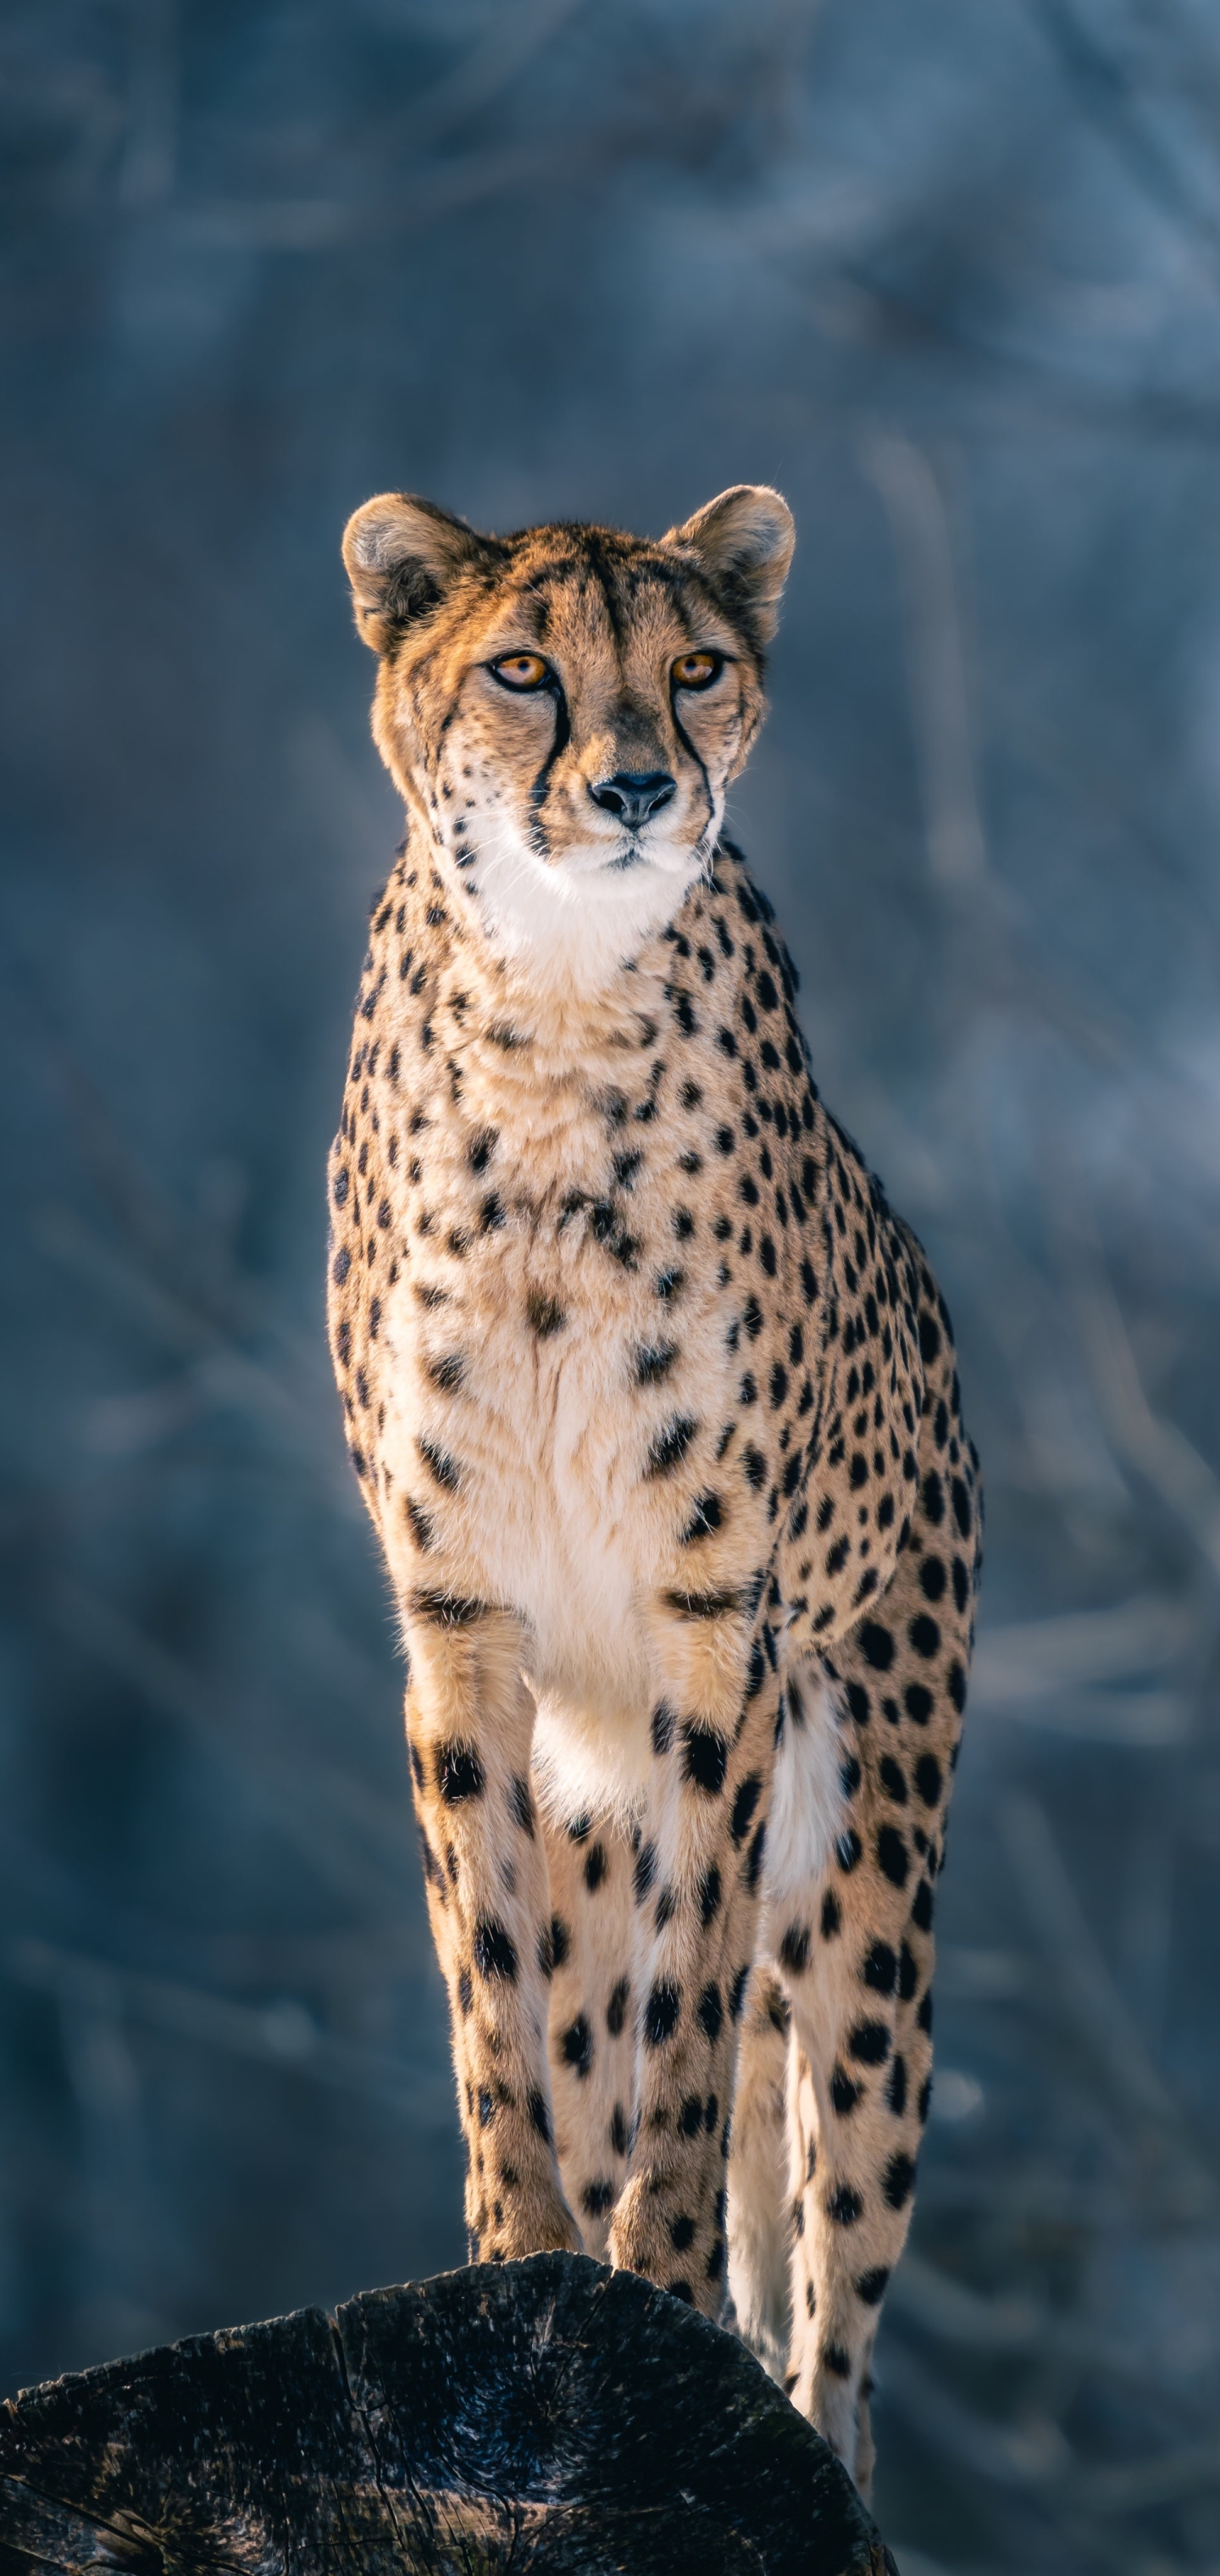 Cheetah Phone Wallpaper by Jason Hazelroth - Mobile Abyss